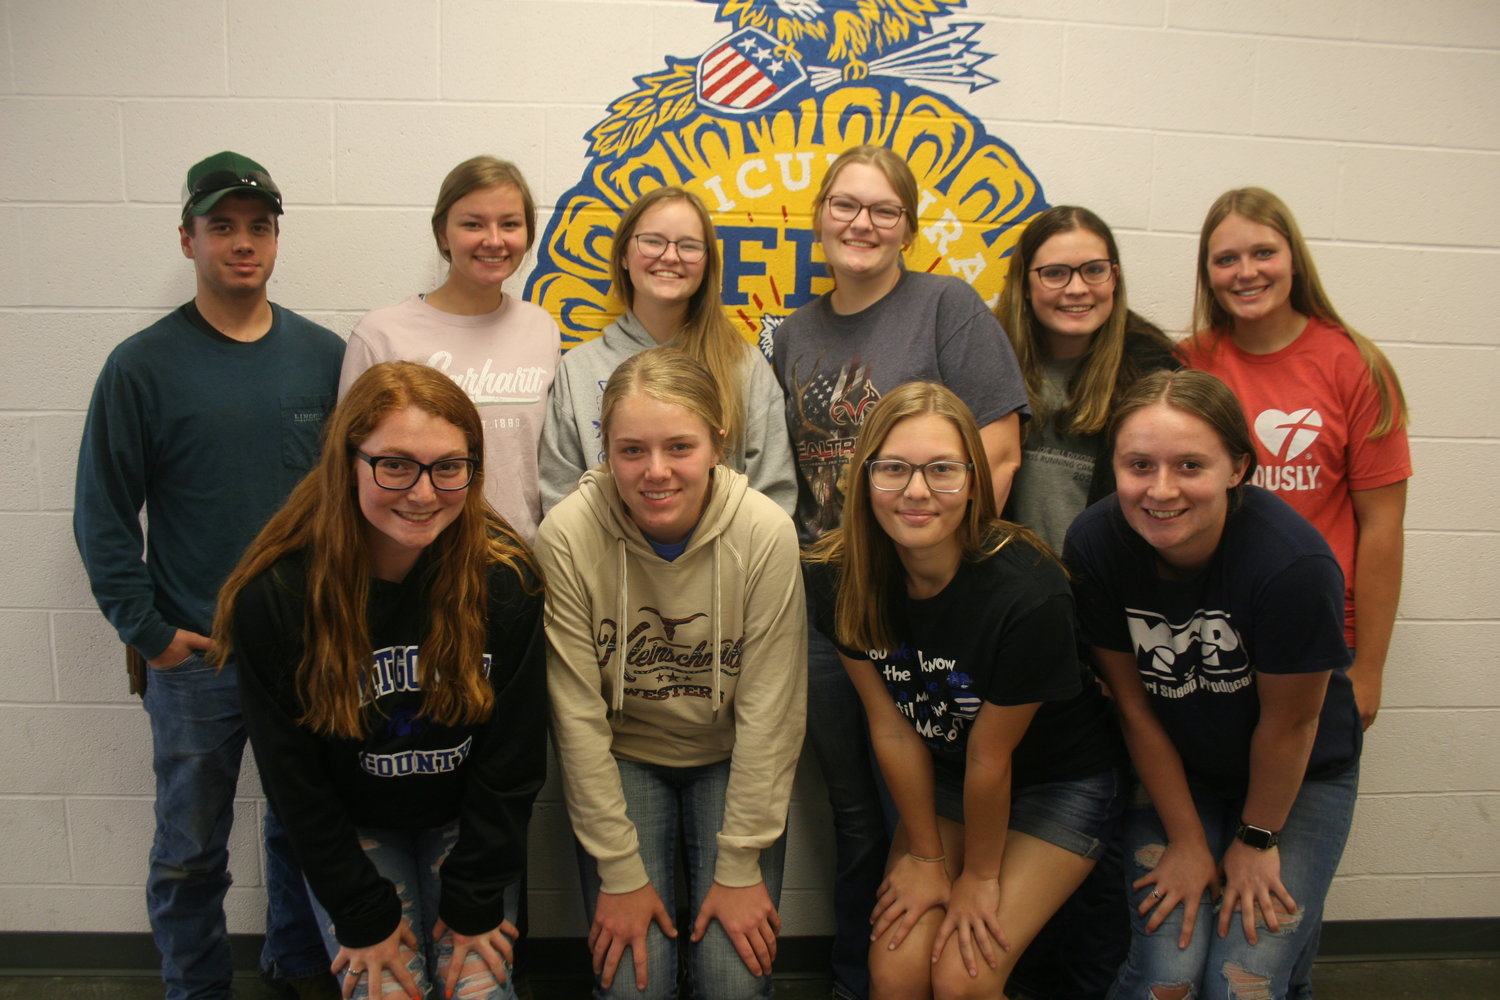 The Montgomery County FFA chapter recently selected its new officers for the 2022-23 school year. Pictured are, front row from left, historian Destani Eversmeyer, secretary Shea Stille, vice-president Presley Schluss and reporter Lexy Veach. Back row are sentinel Derrick Cobb, treasurer Ray Poston, president Cora Johnson, vice-president Brianne West, secretary Carie Schroer and parlimentarian Avery Ridgley.